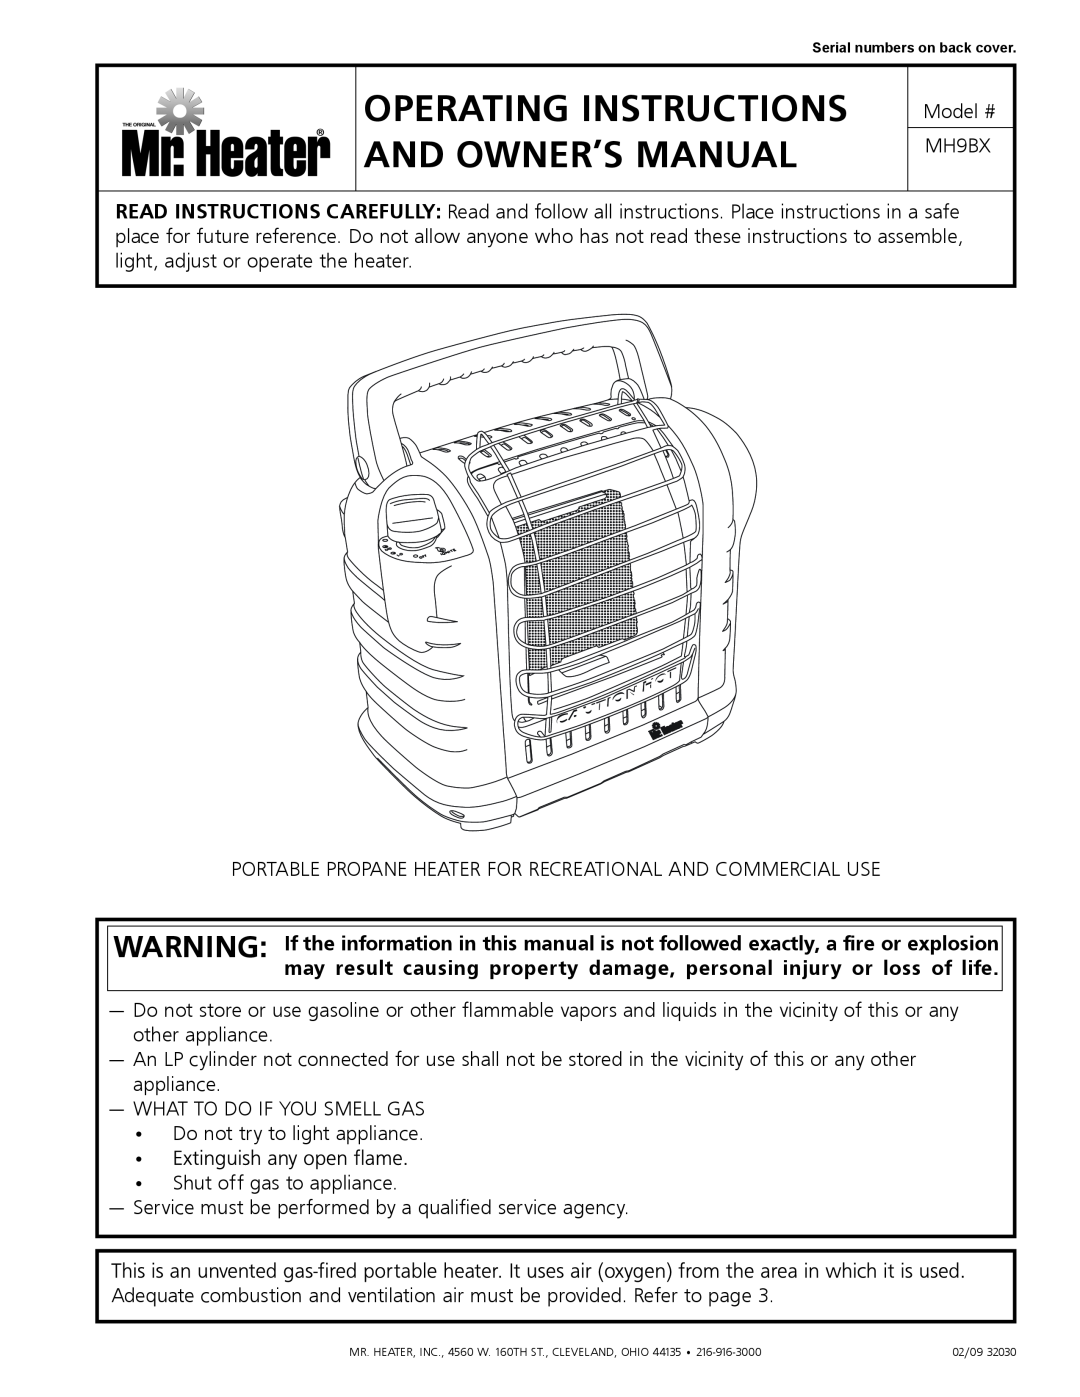 Mr. Heater MH9BX owner manual Operating Instructions And Owner’S Manual 